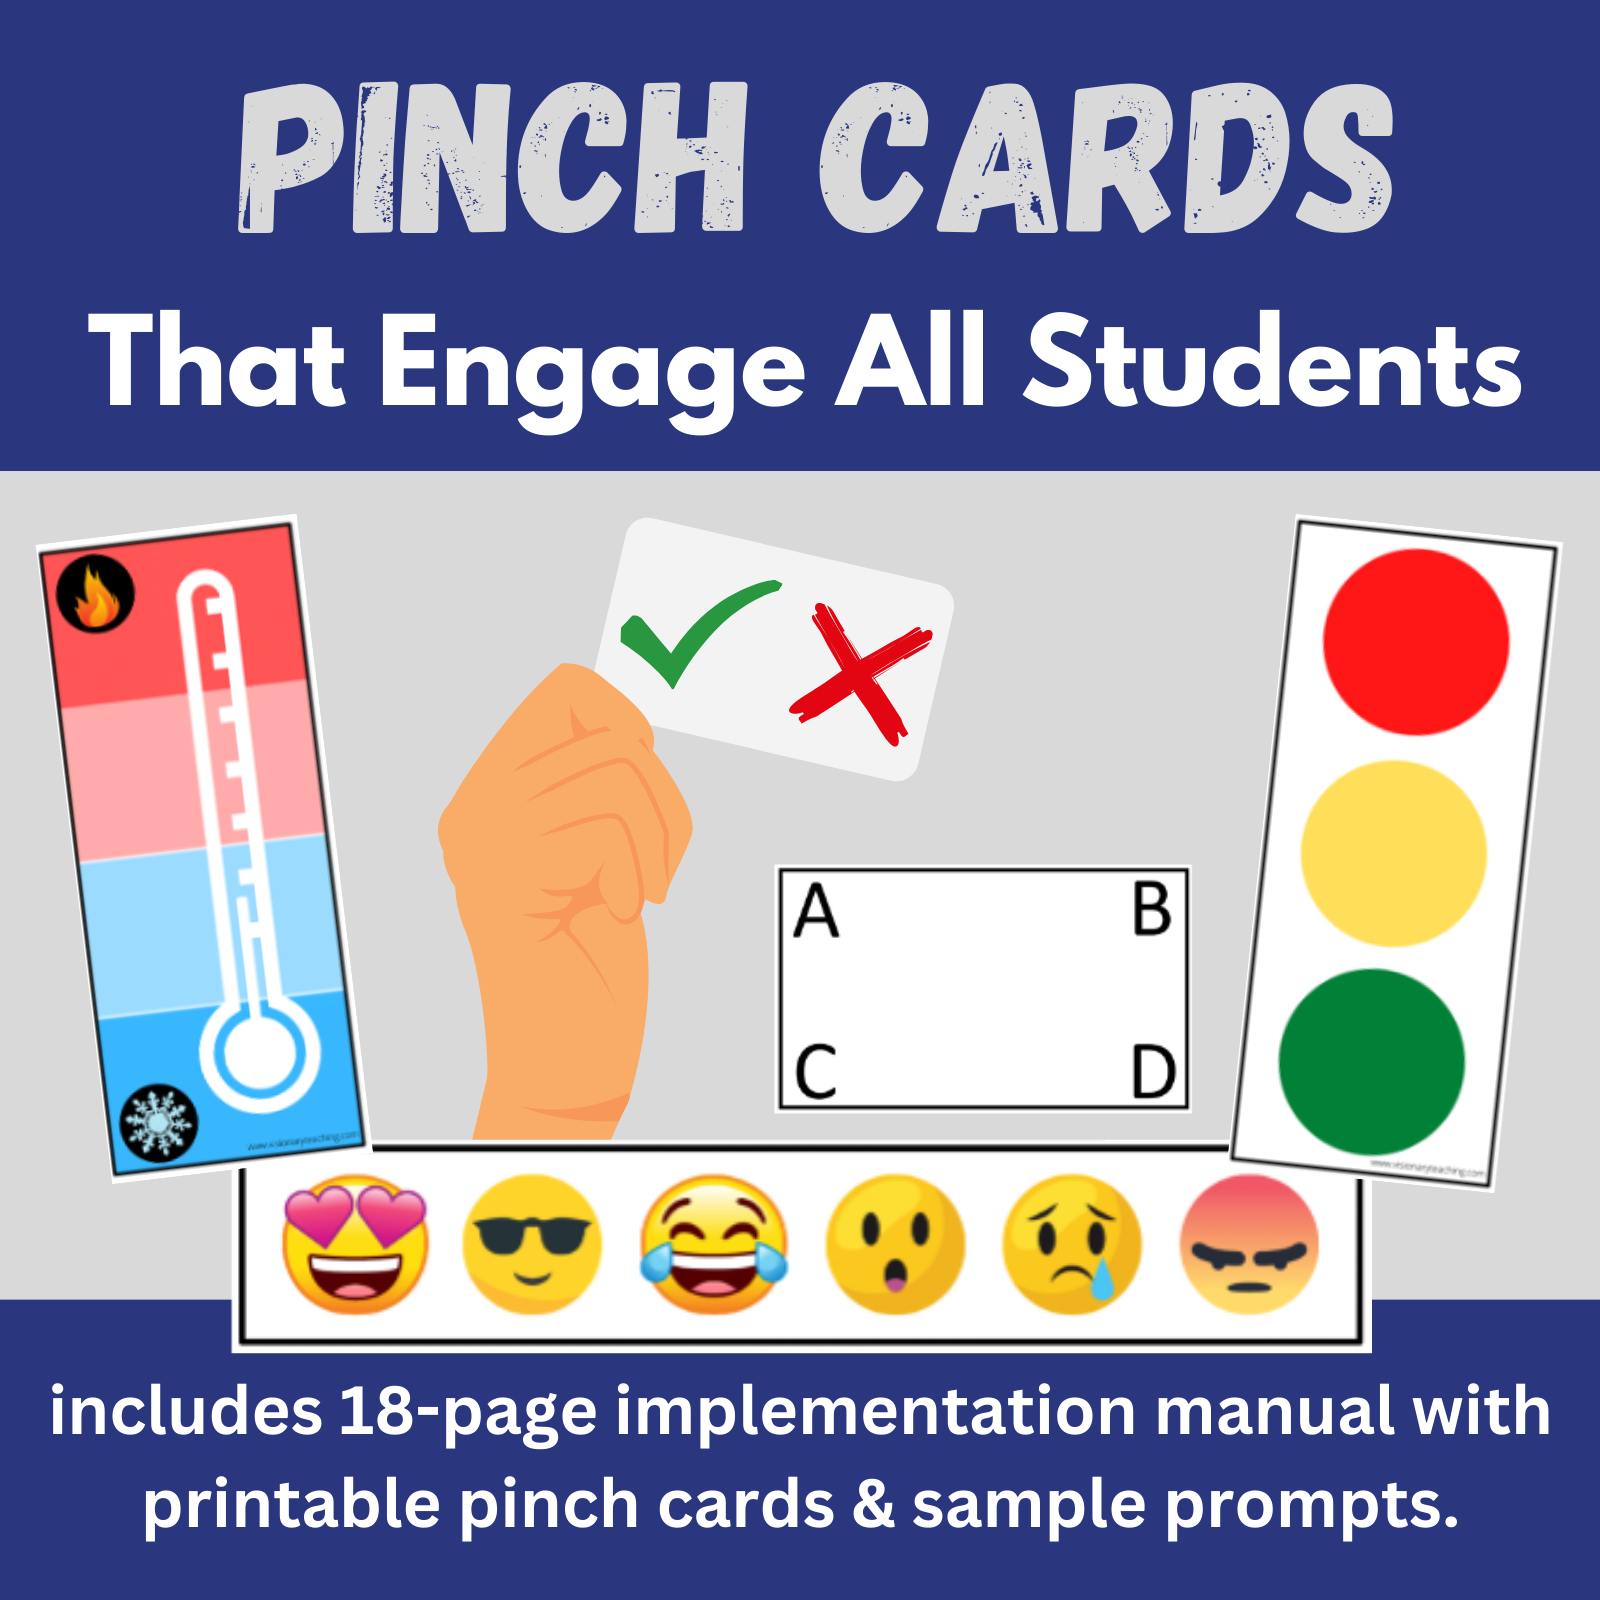 navy blue background with gray text that says "pinch cards that engage all students. In the middle are decorative clipart representing pinch cards.